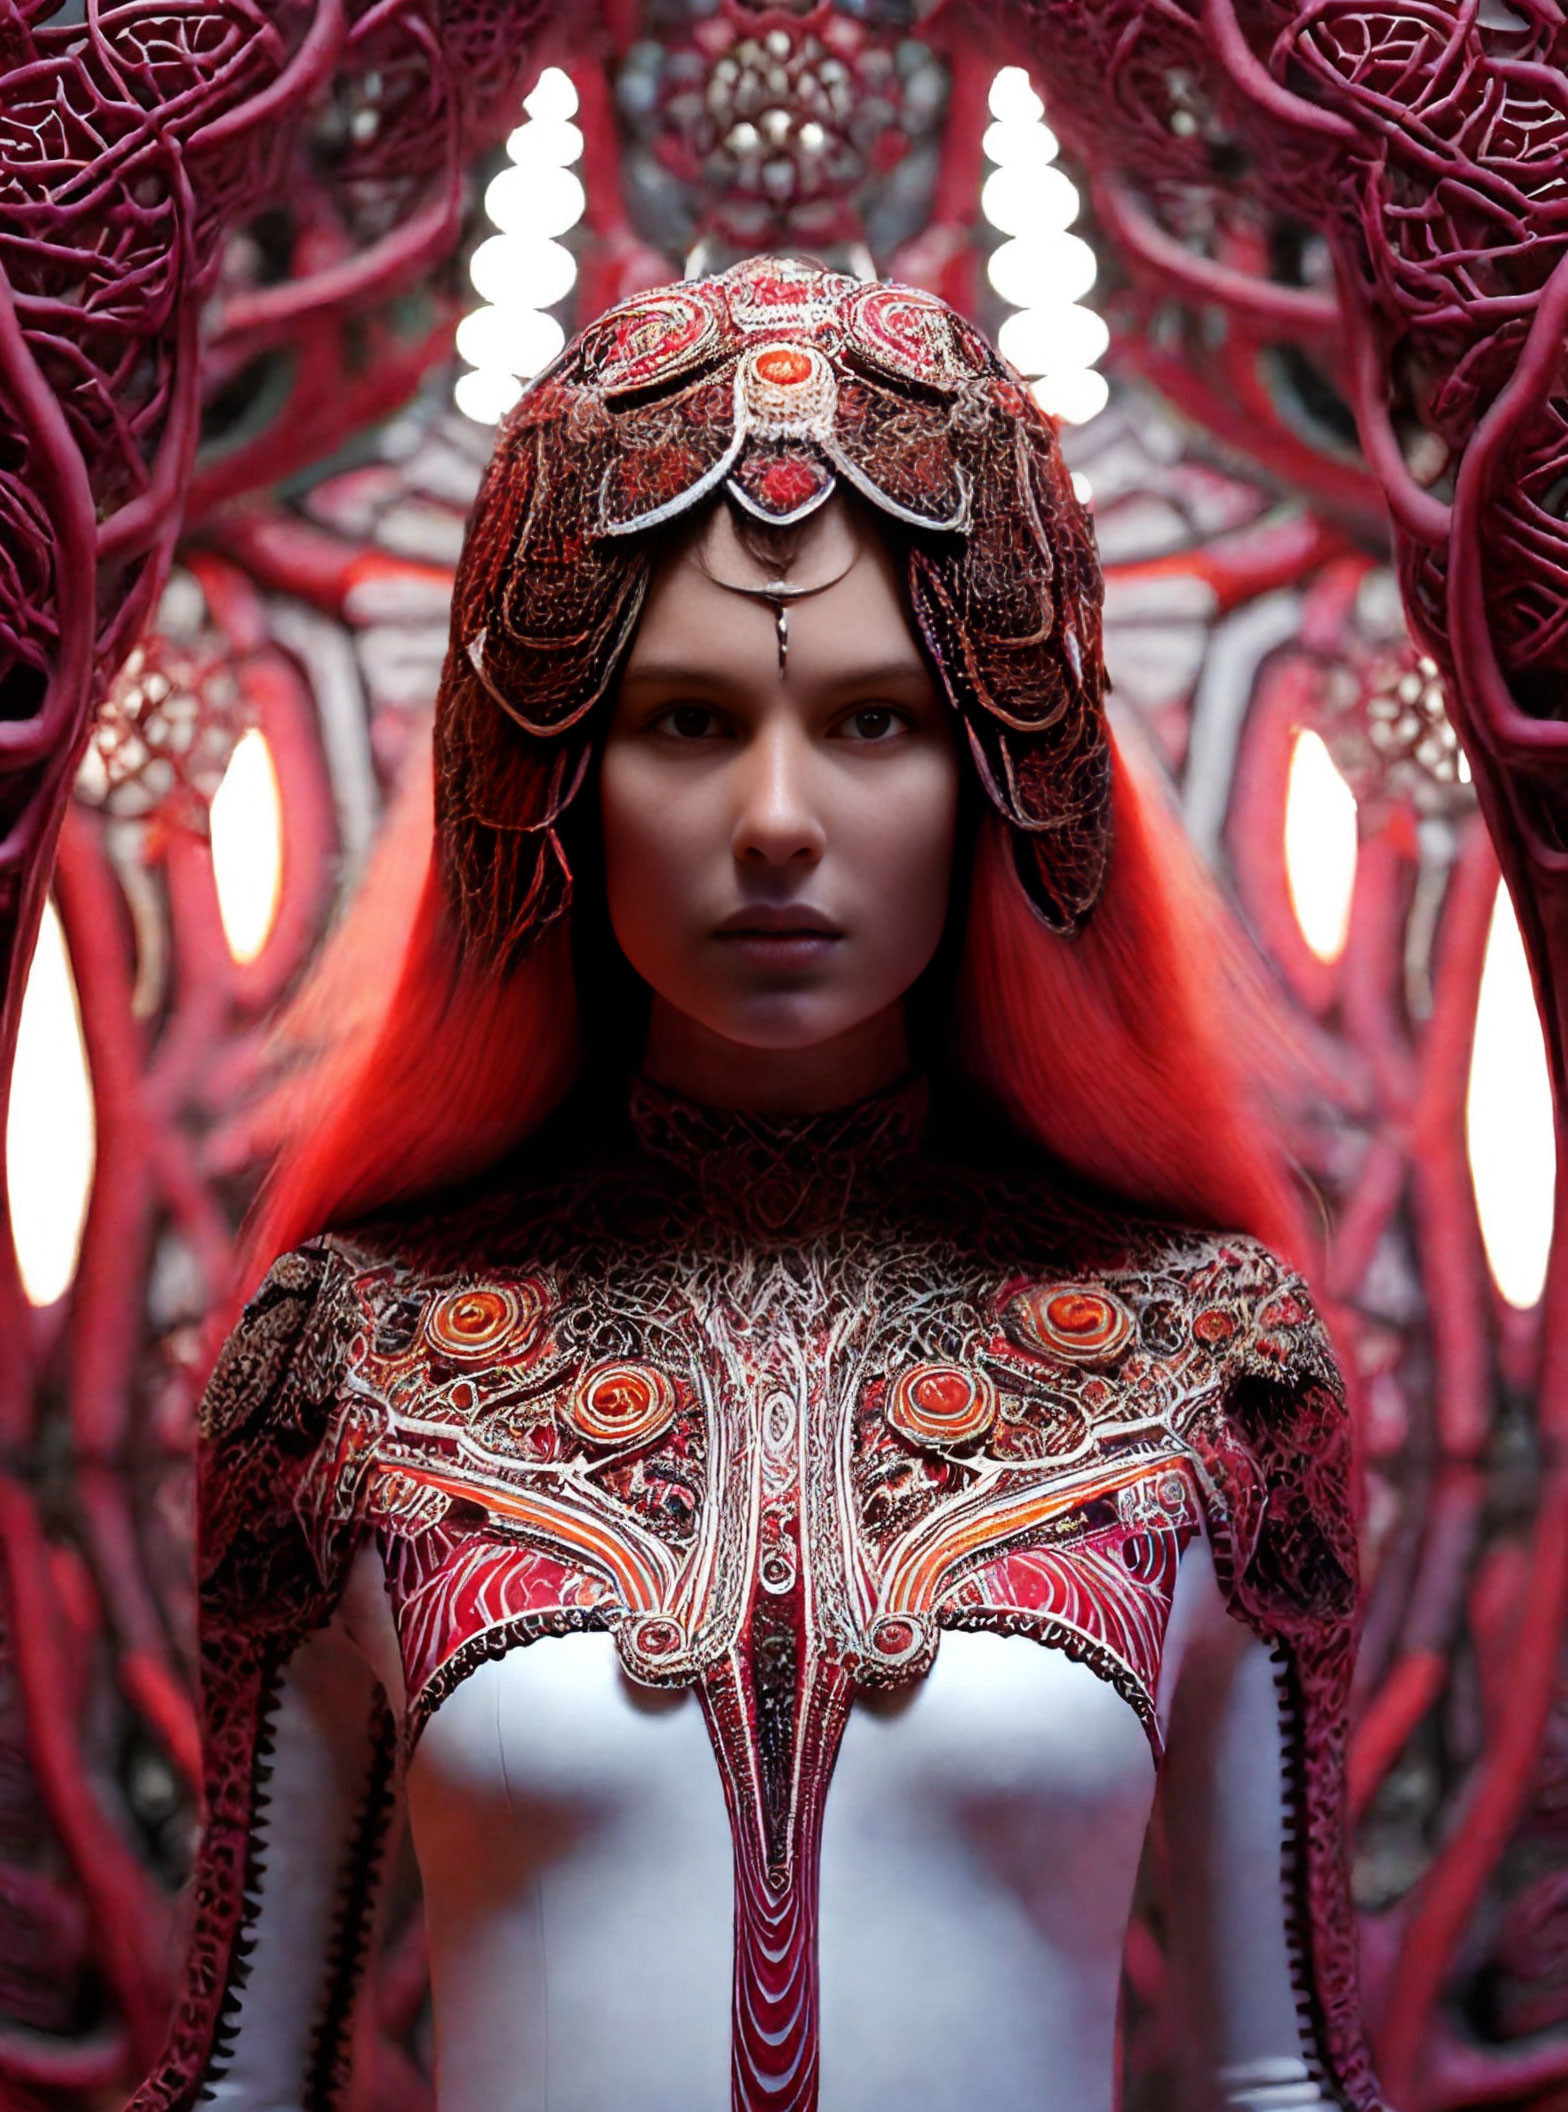 Striking Red-Haired Woman in Ornate Headdress and Garment